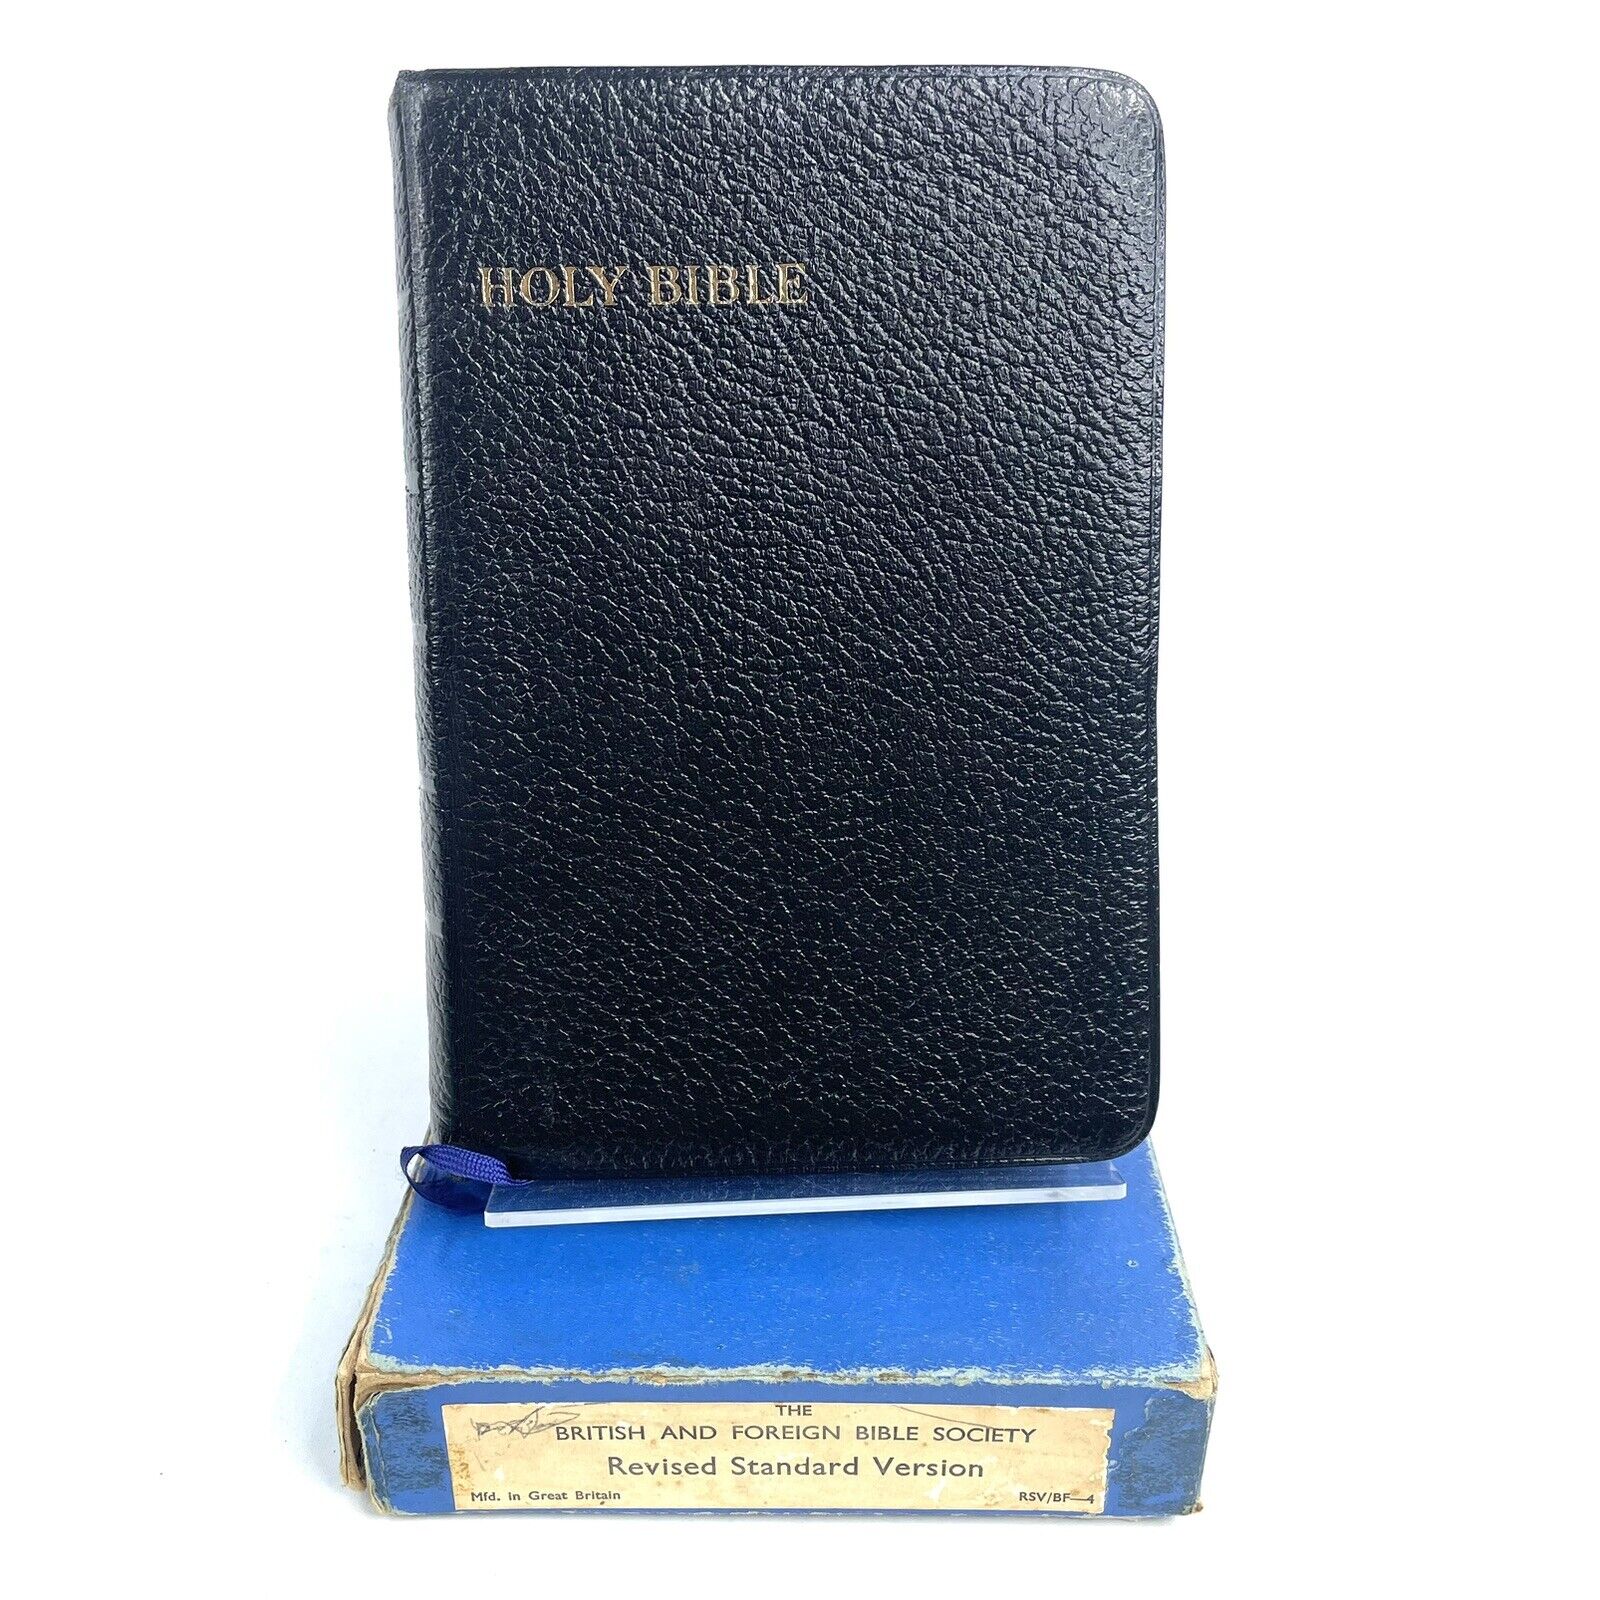 The British and foreign bible society leather bound 1952 with box